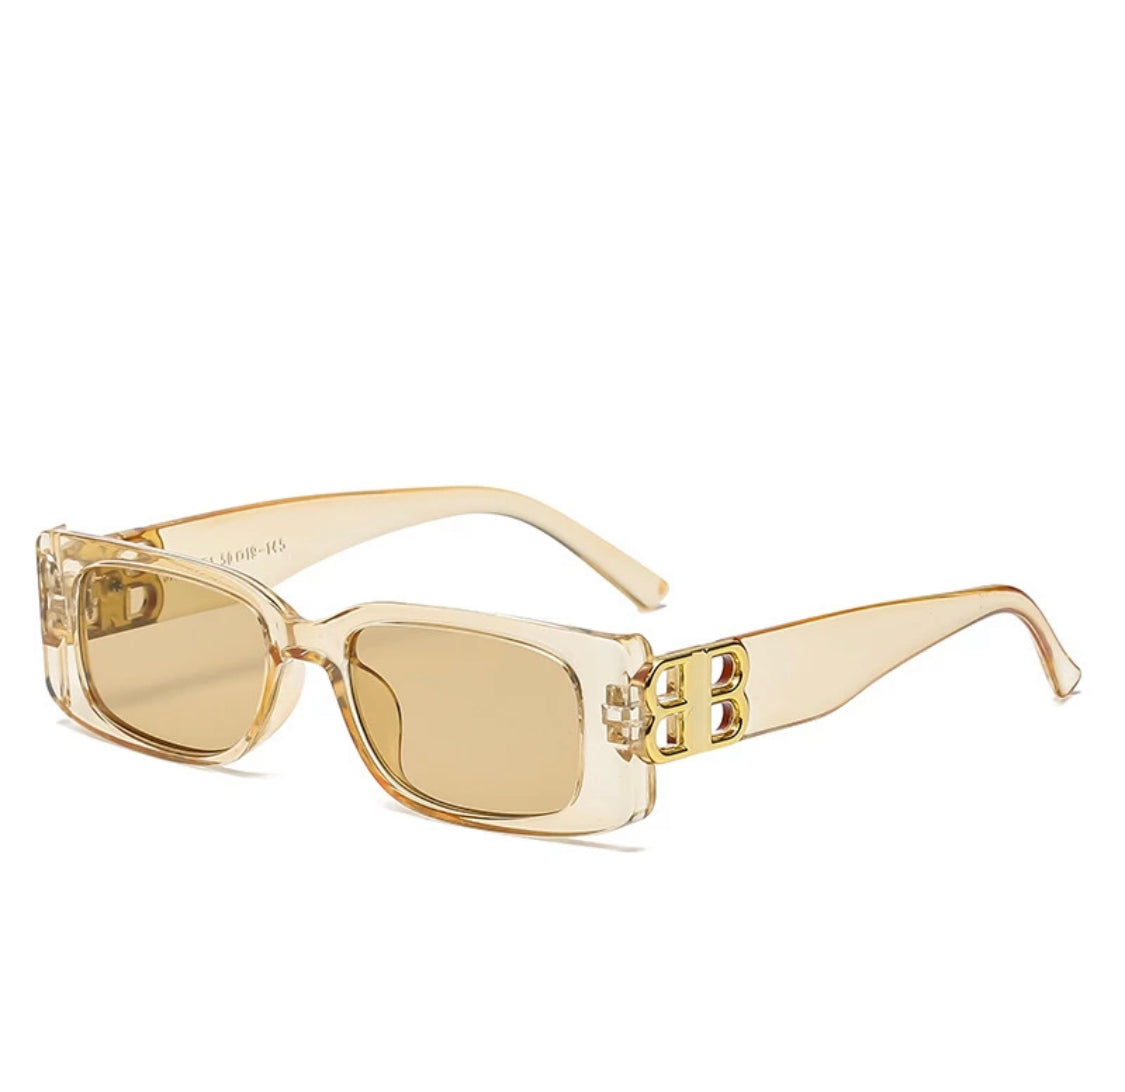 Glamour sunglasses-various colors